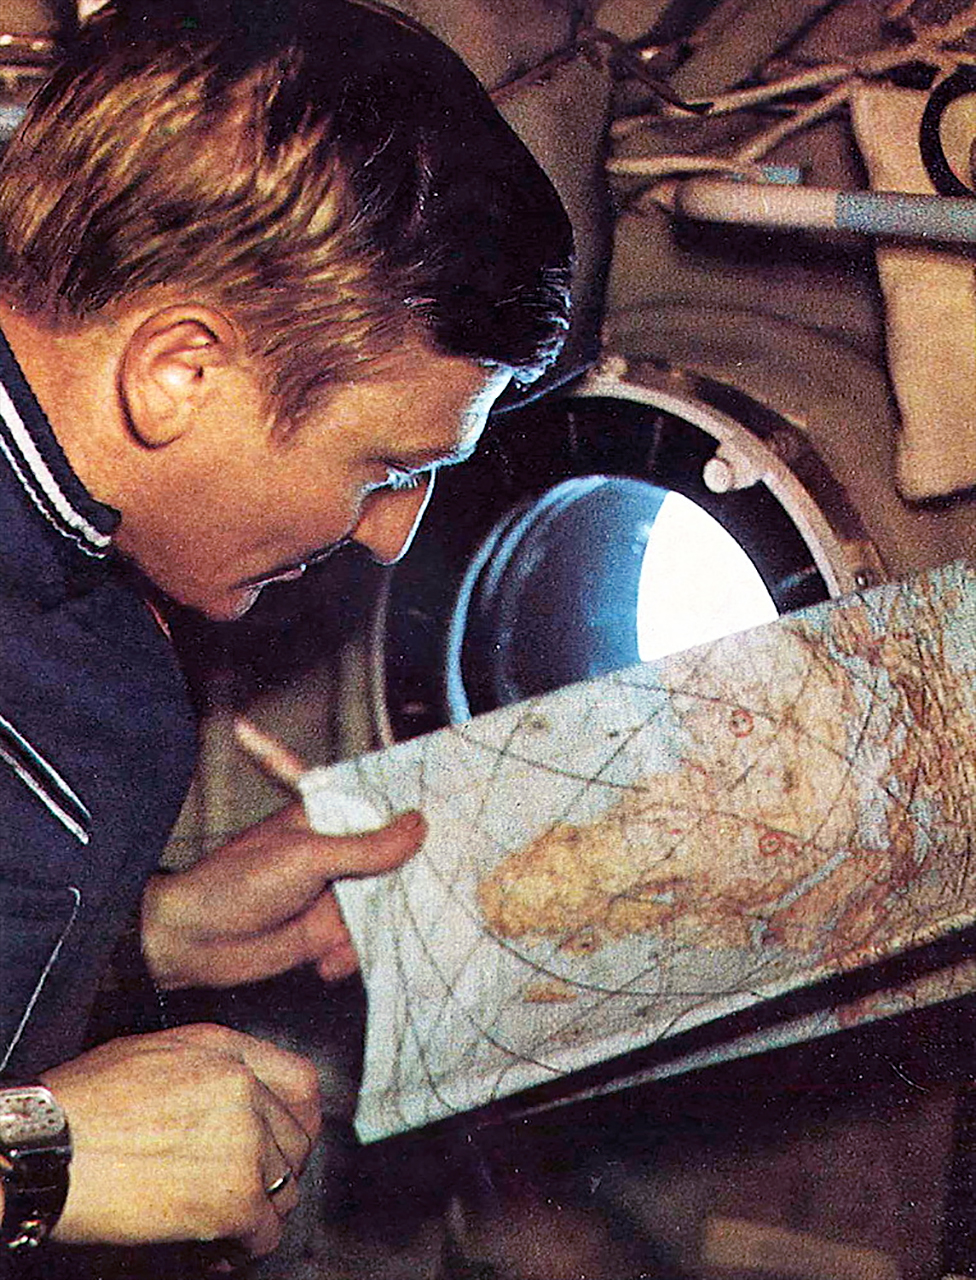 Mirosław Hermaszewski uses a map while performing observations of Earth aboard the Salyut 6 space station in 1978.